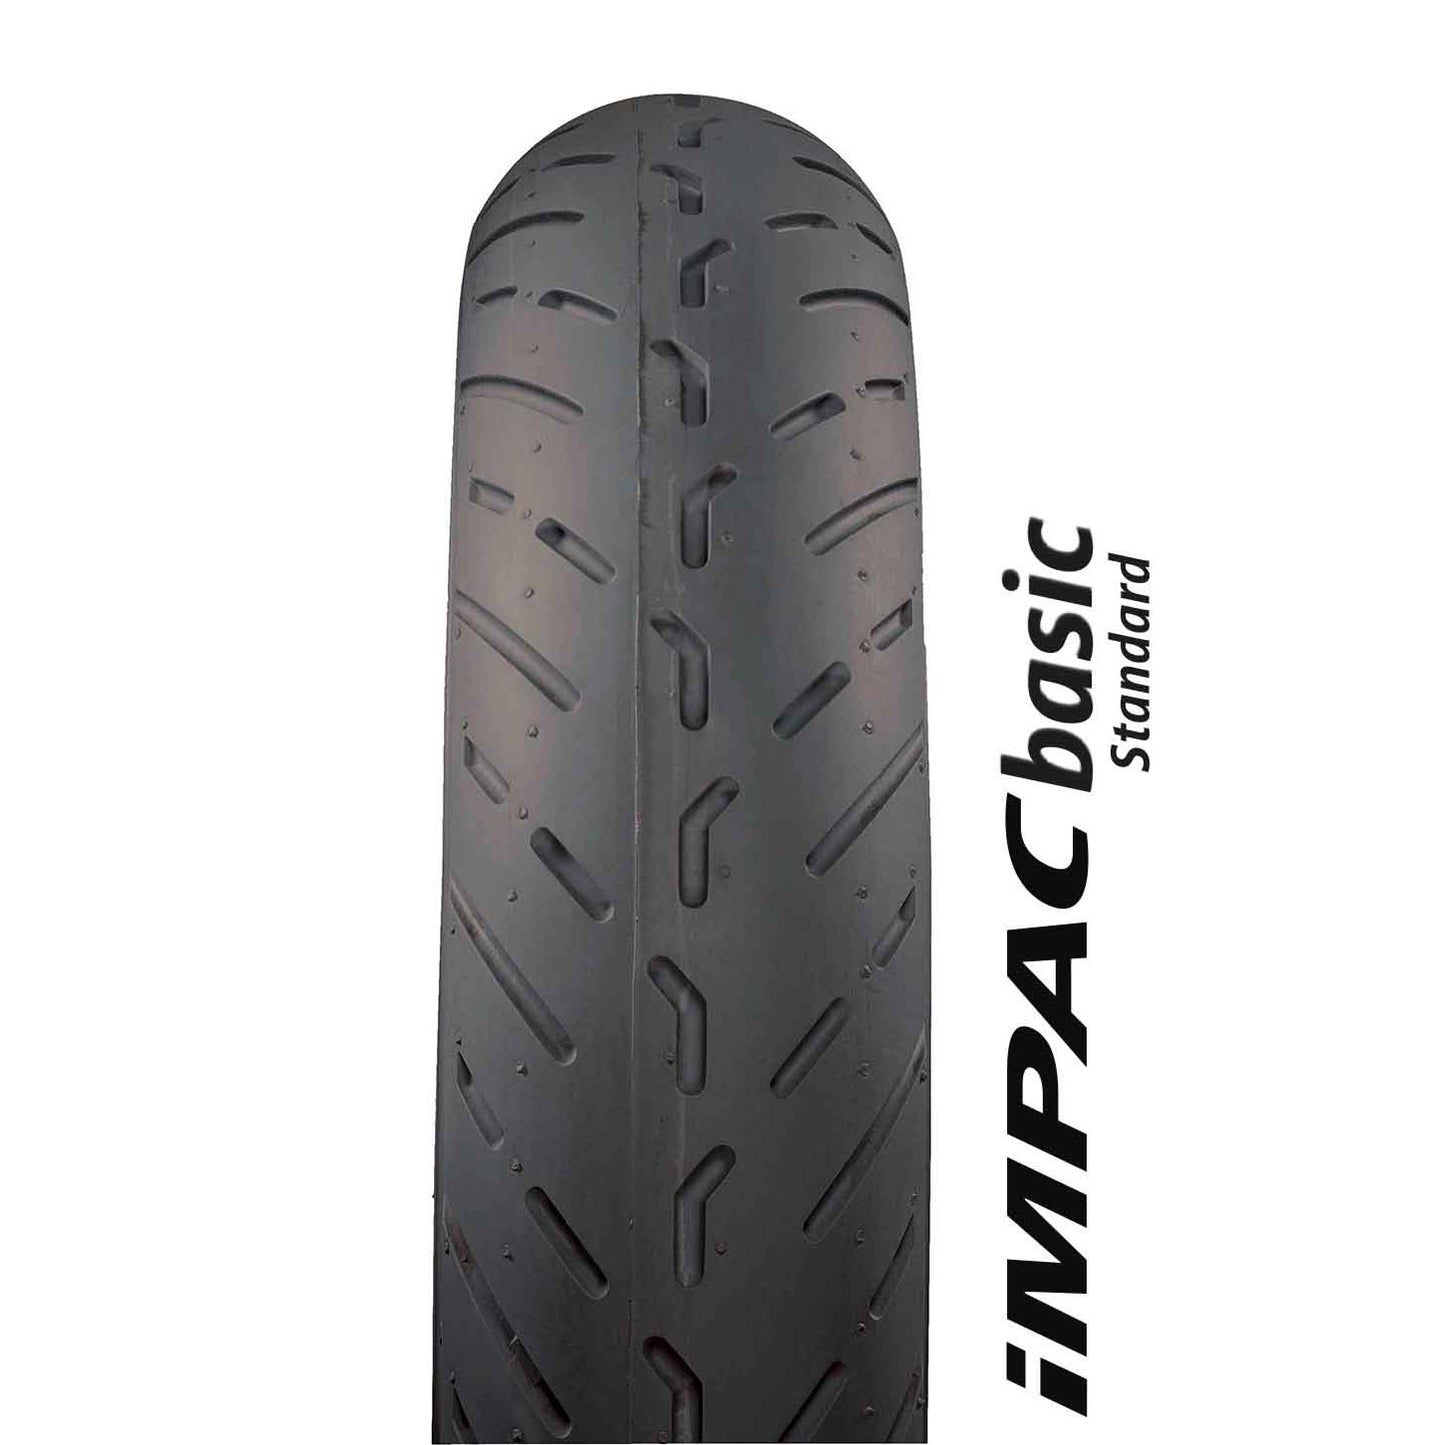 Impac Outer Tire 3.00x8 (350x70) IS-306 Negro